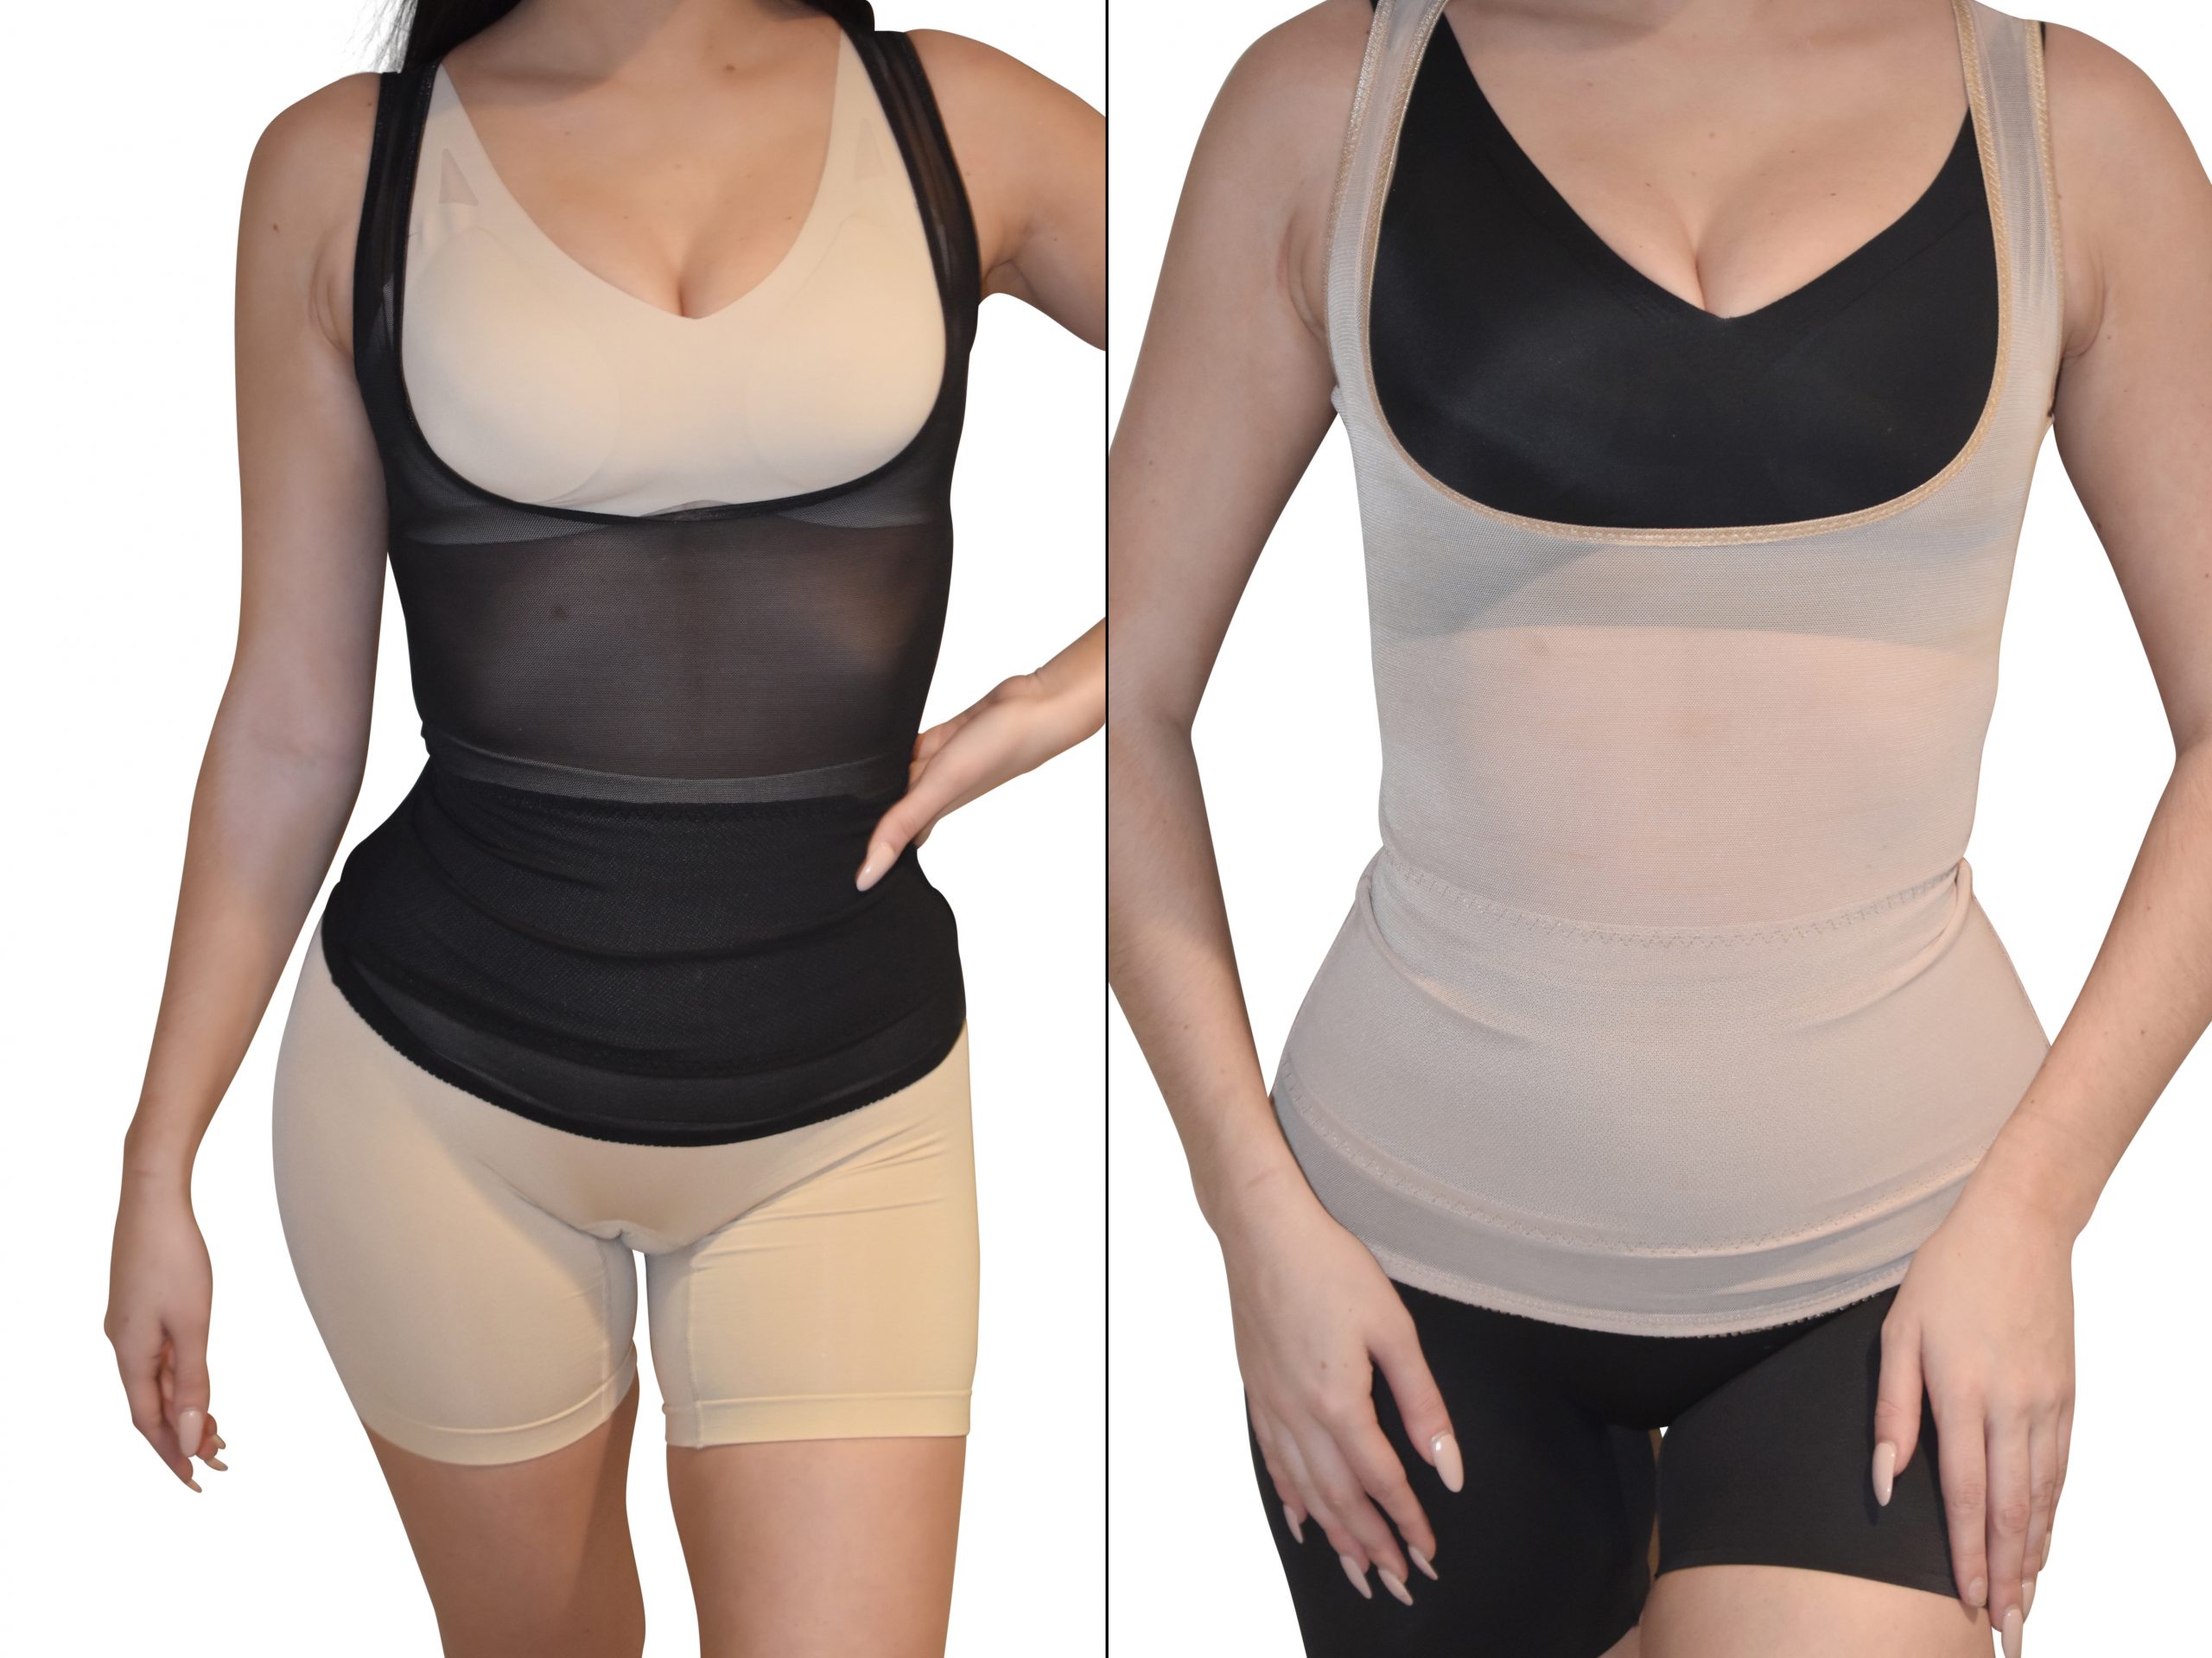  Envy Set of 2 New Body shapers (S) : Clothing, Shoes